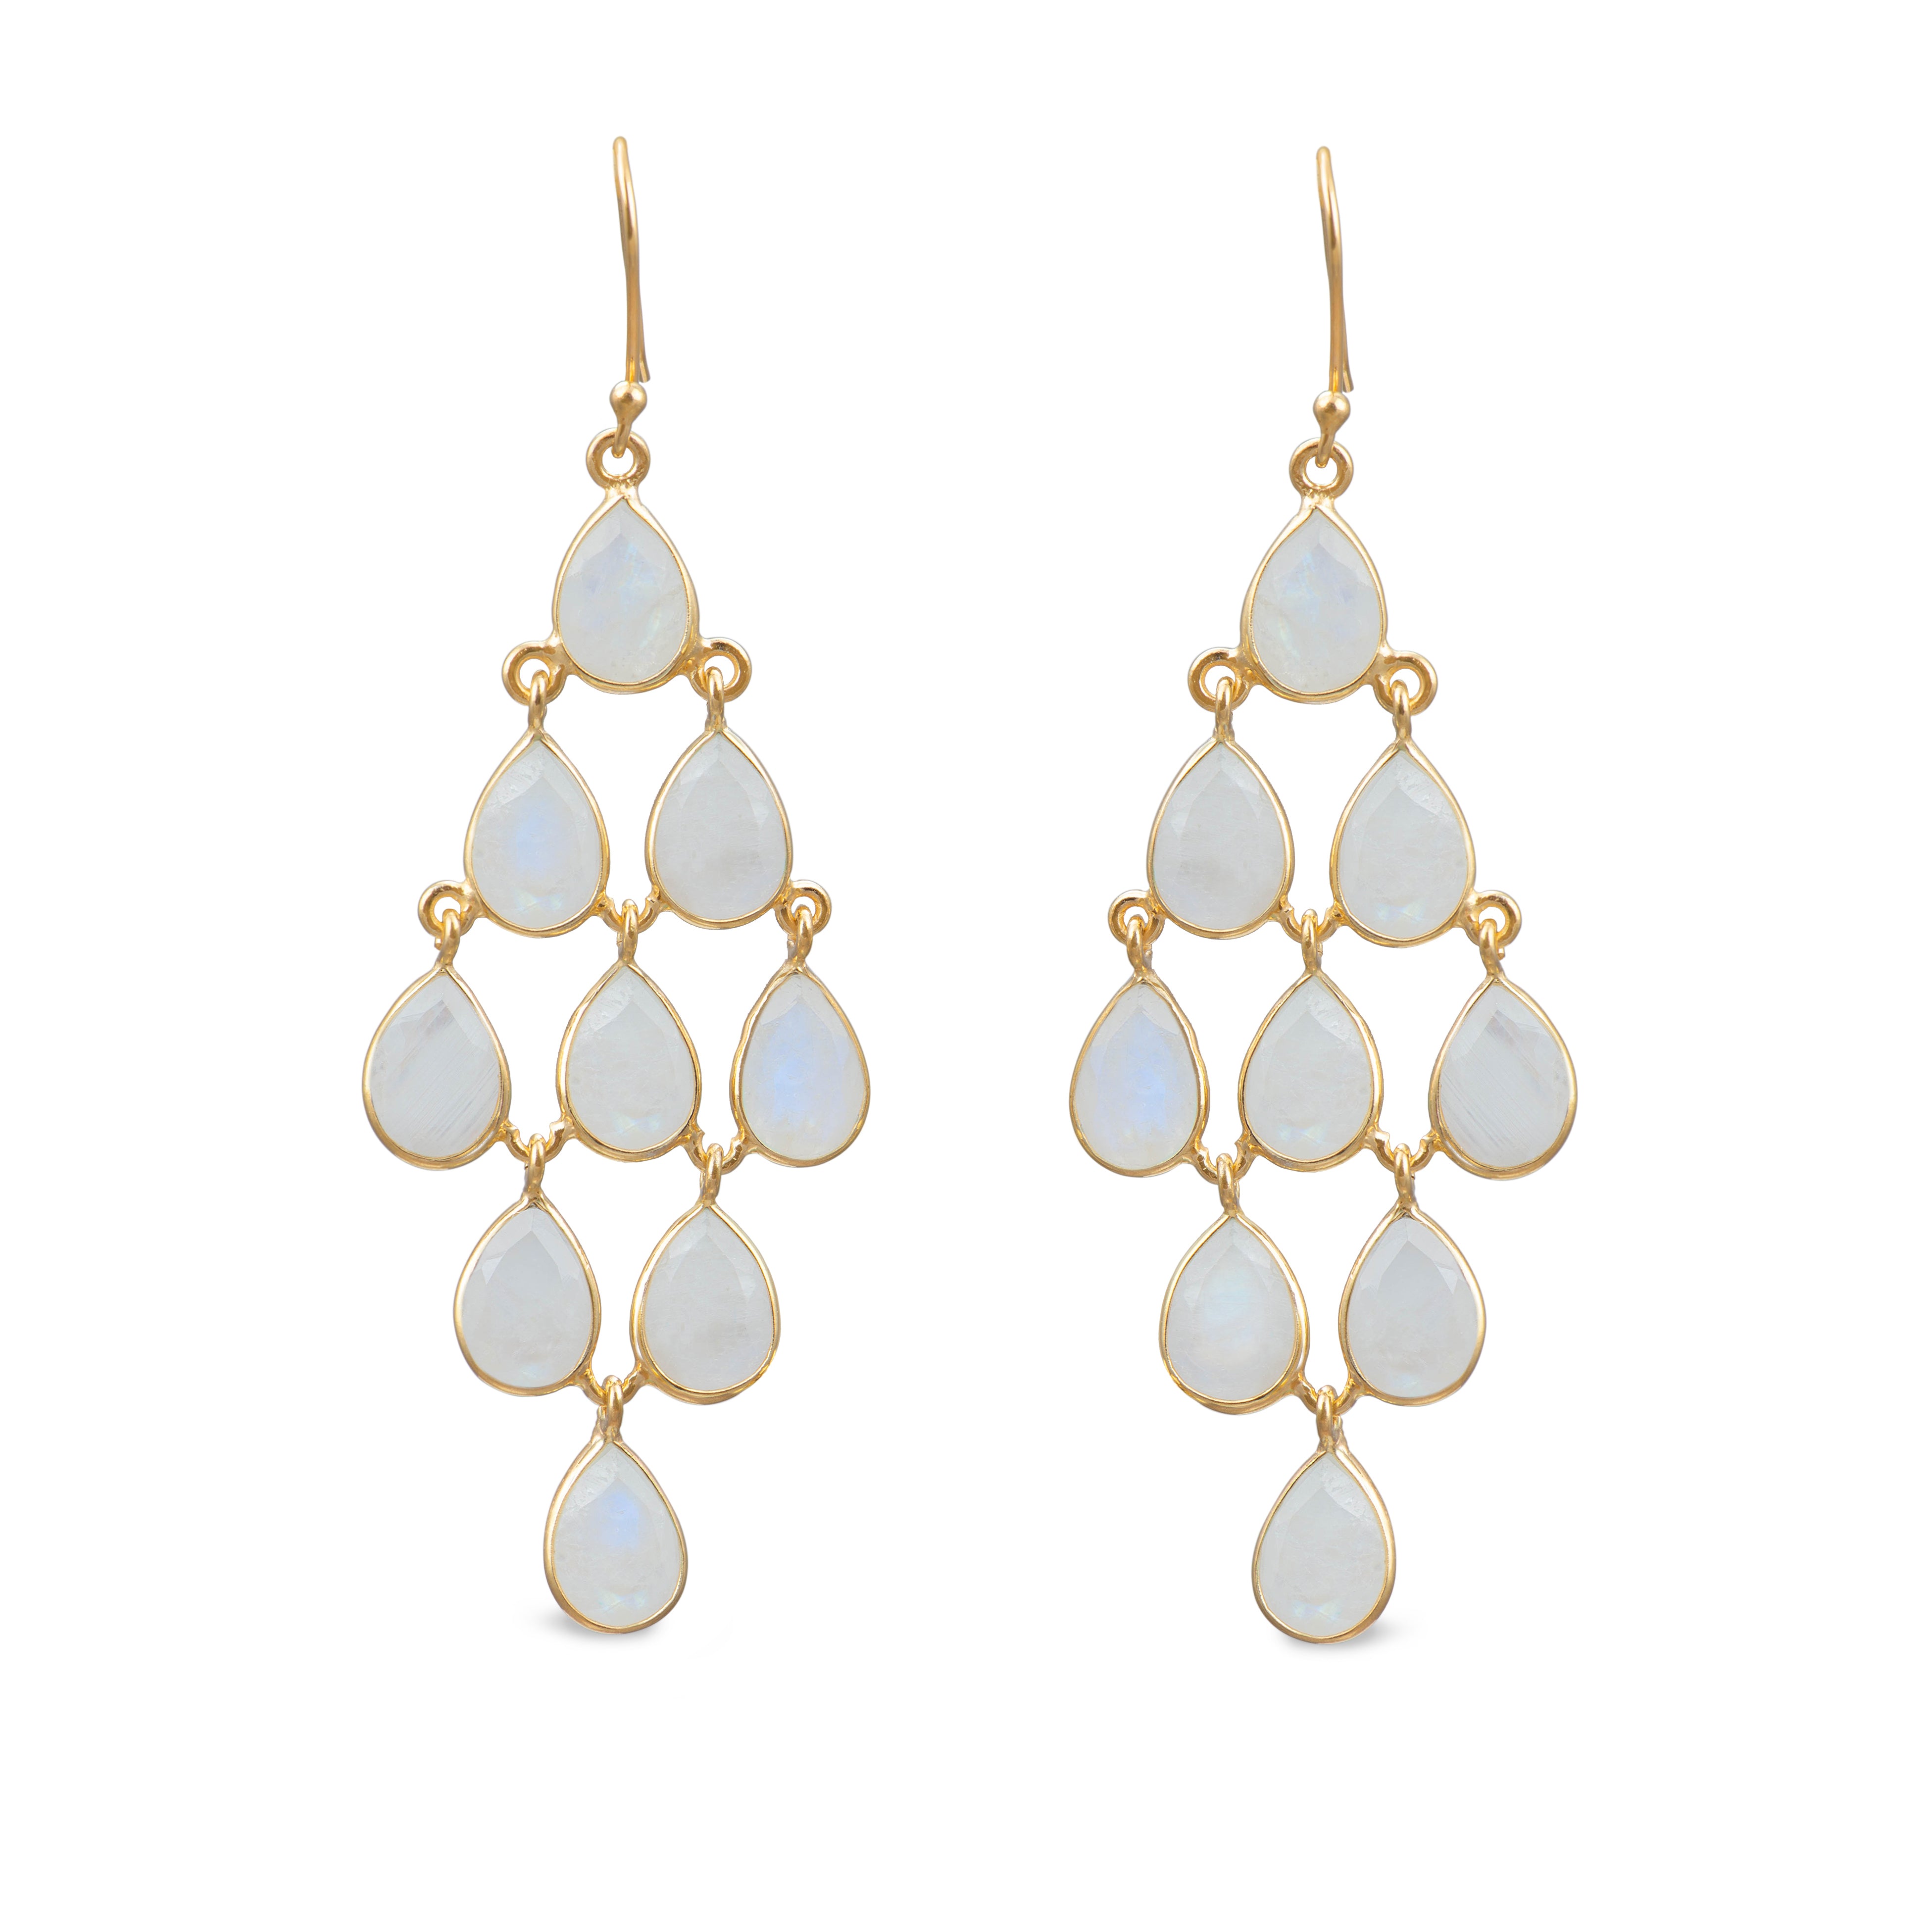 Gold Plated Sterling Silver Chandelier Earrings with Natural Gemstones  - Moonstone